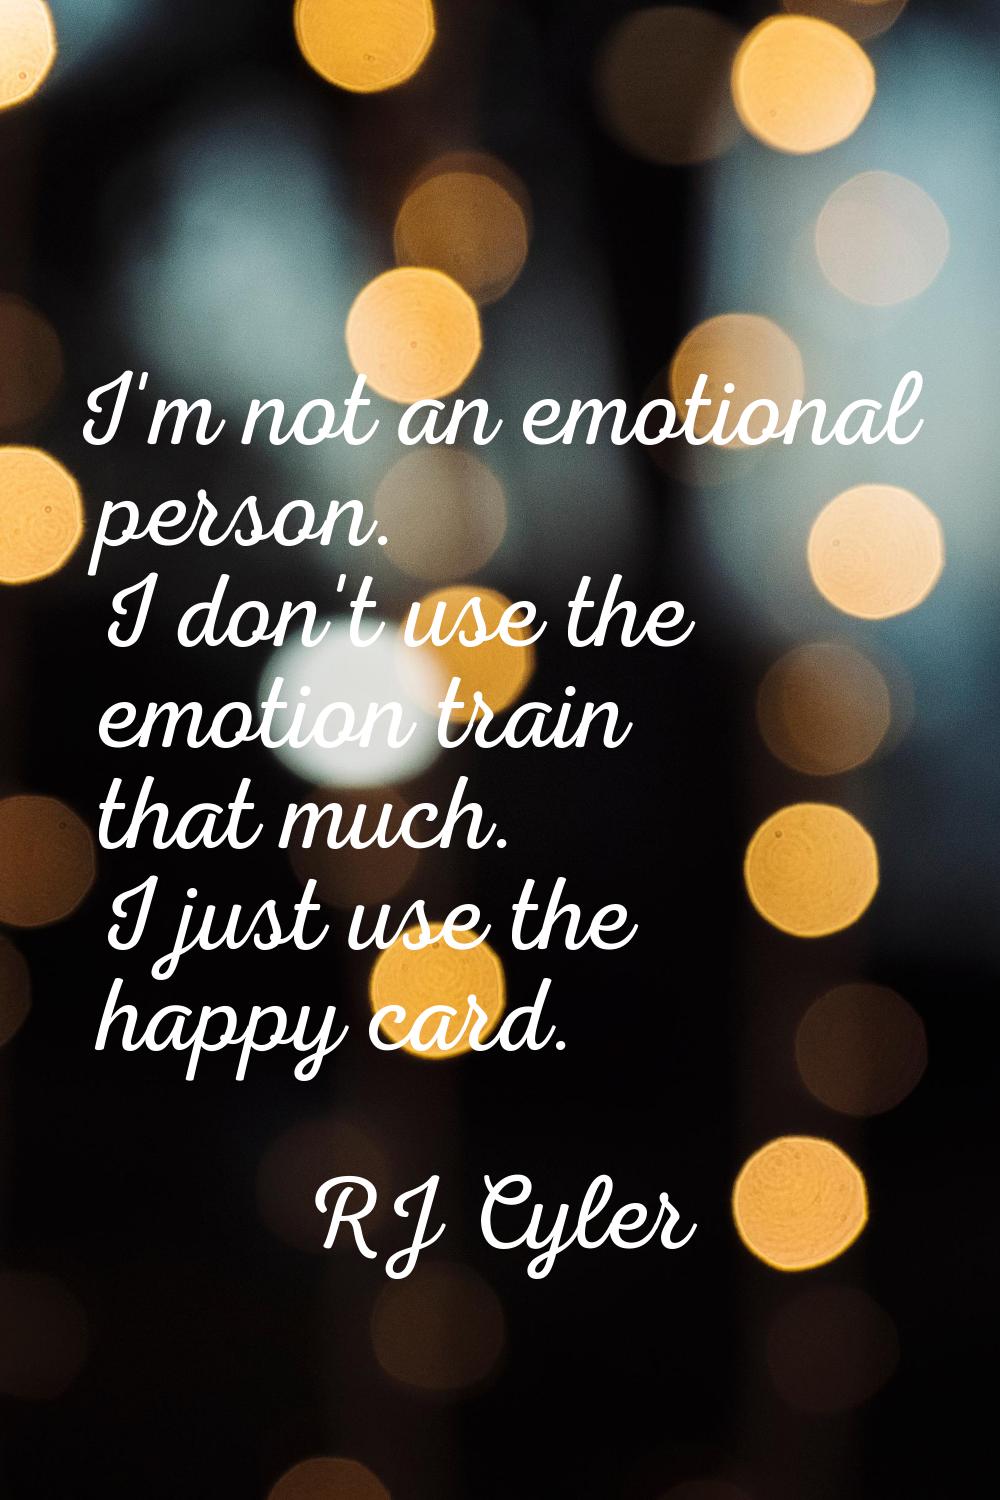 I'm not an emotional person. I don't use the emotion train that much. I just use the happy card.